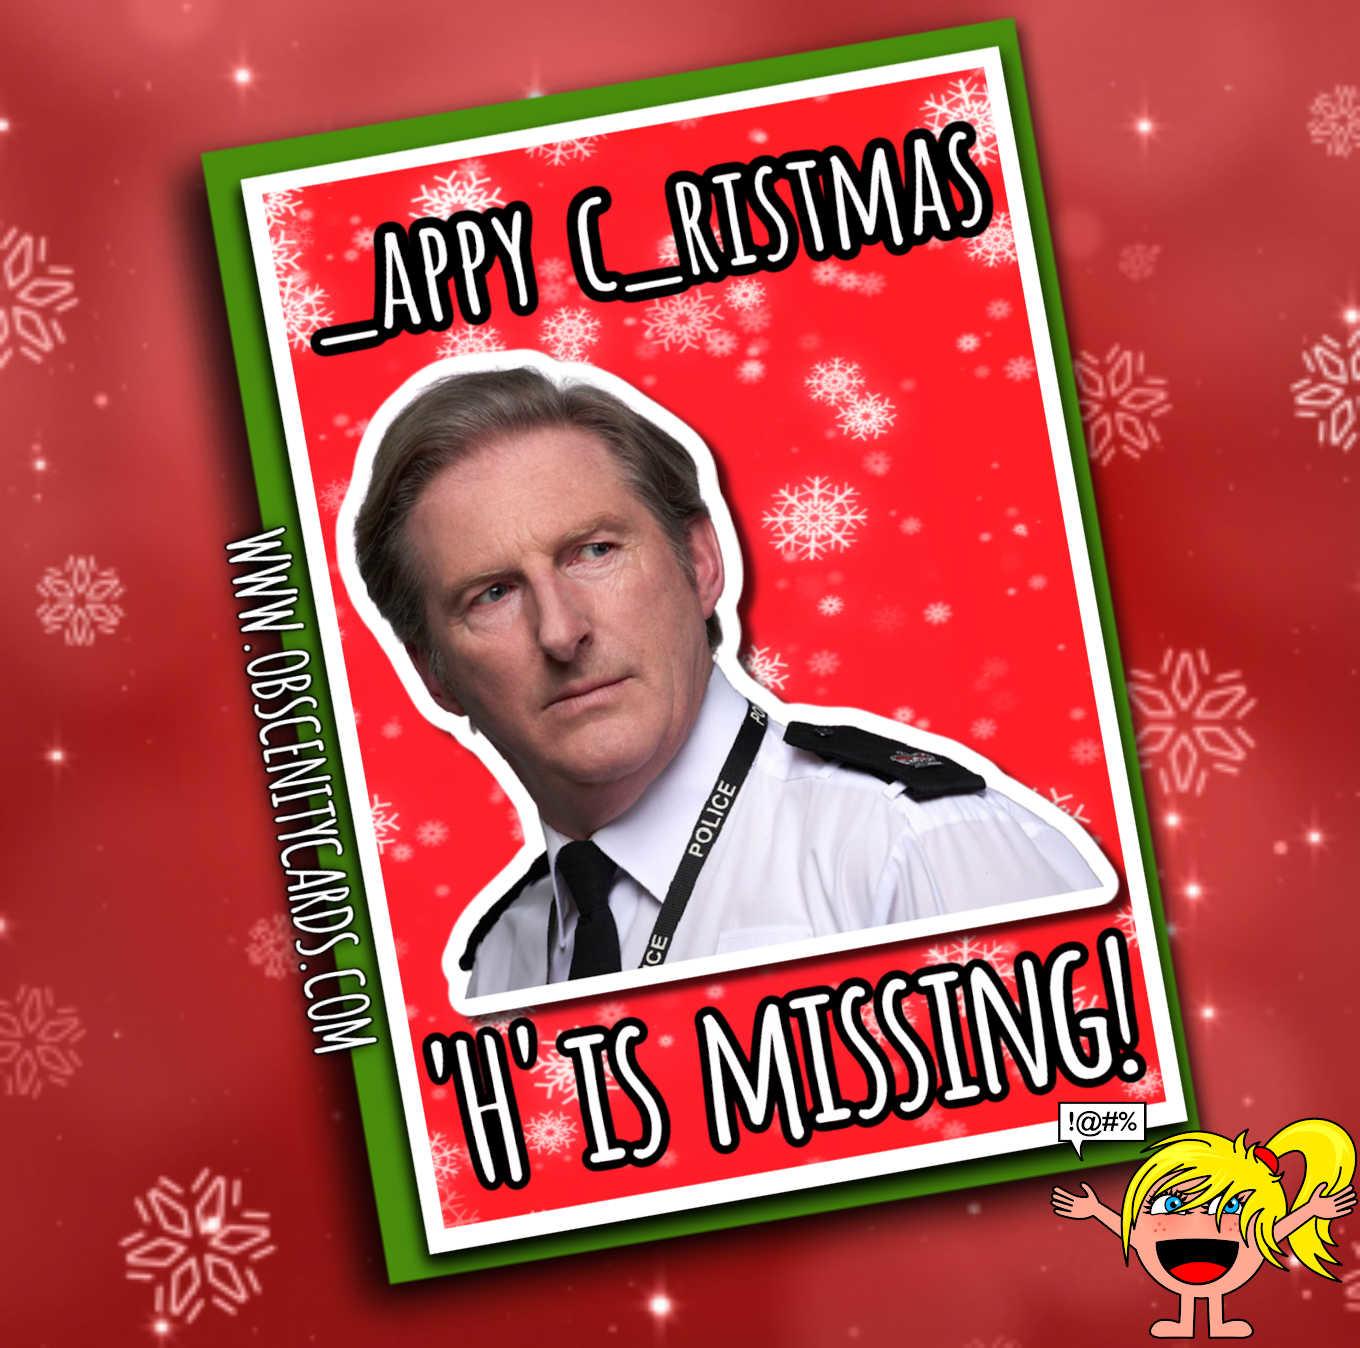 Happy Christmas 'H' is missing! funny Line Of Duty Christmas Card